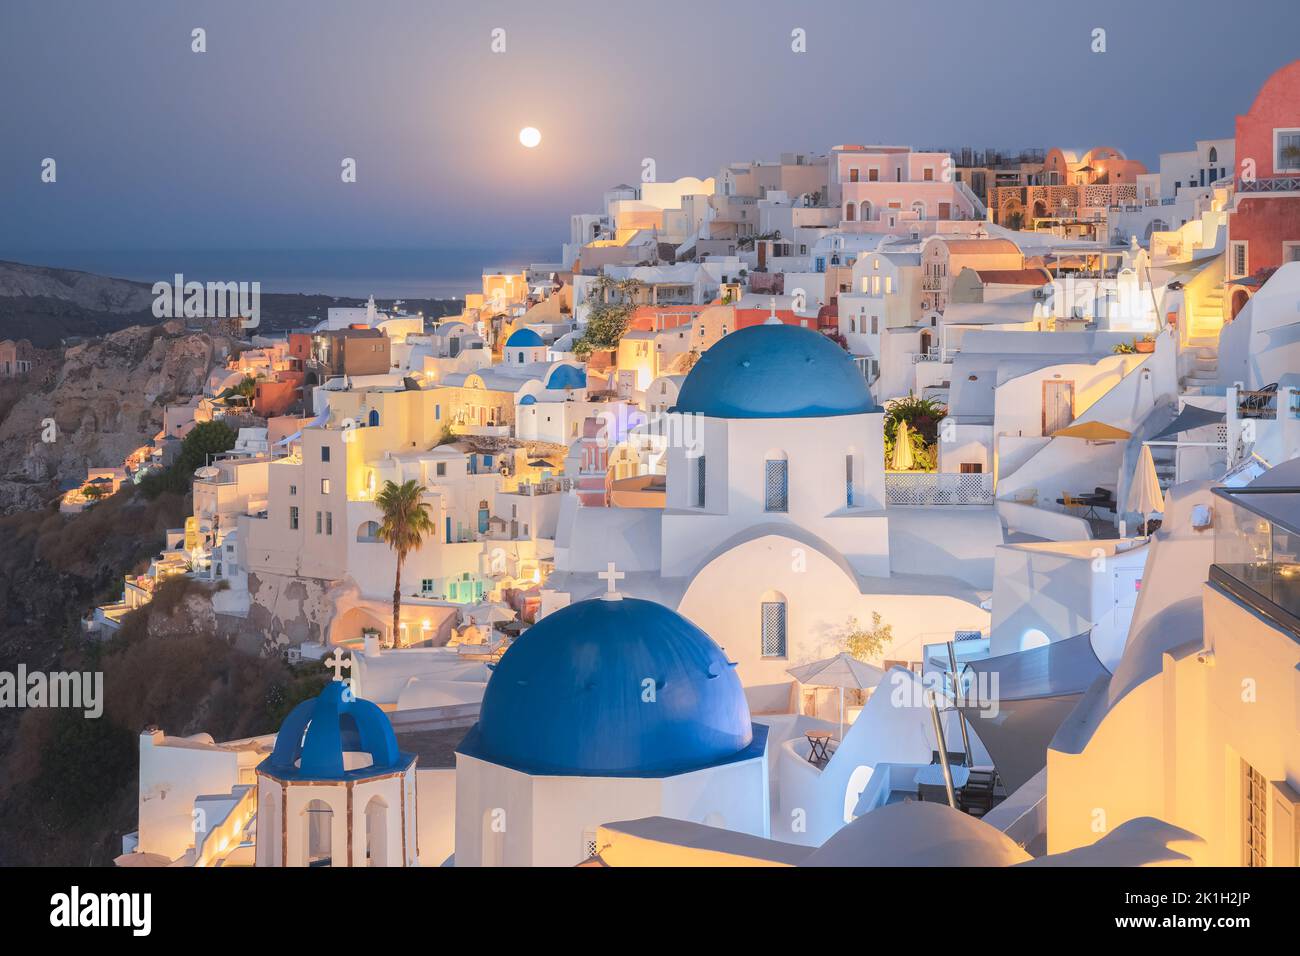 Seaside moonlit view at night of traditional white wash buildings and blue dome churches at the popular seaside tourist resort village of Oia on the G Stock Photo